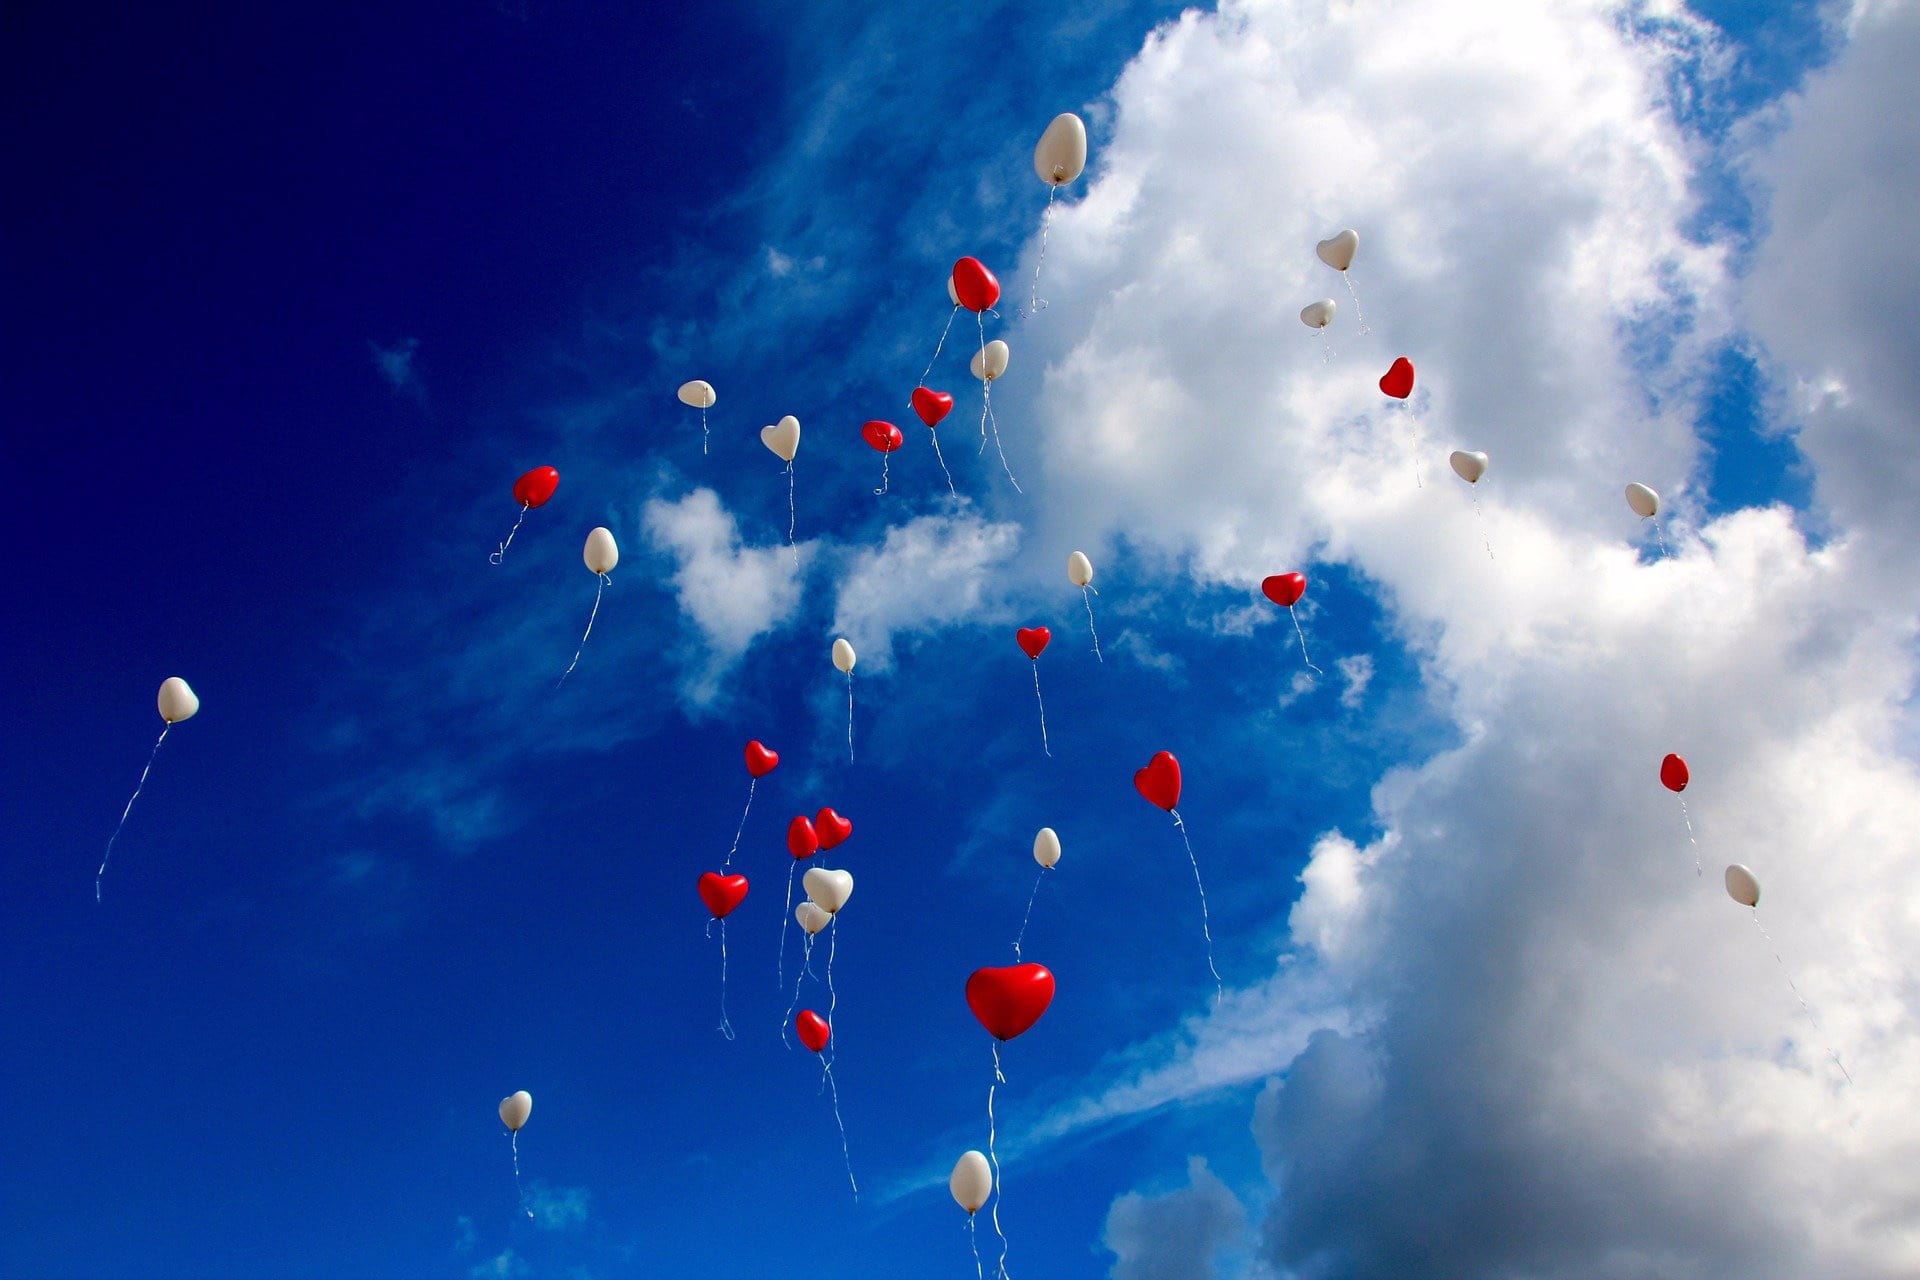 Heart shaped red and white balloons in the sky